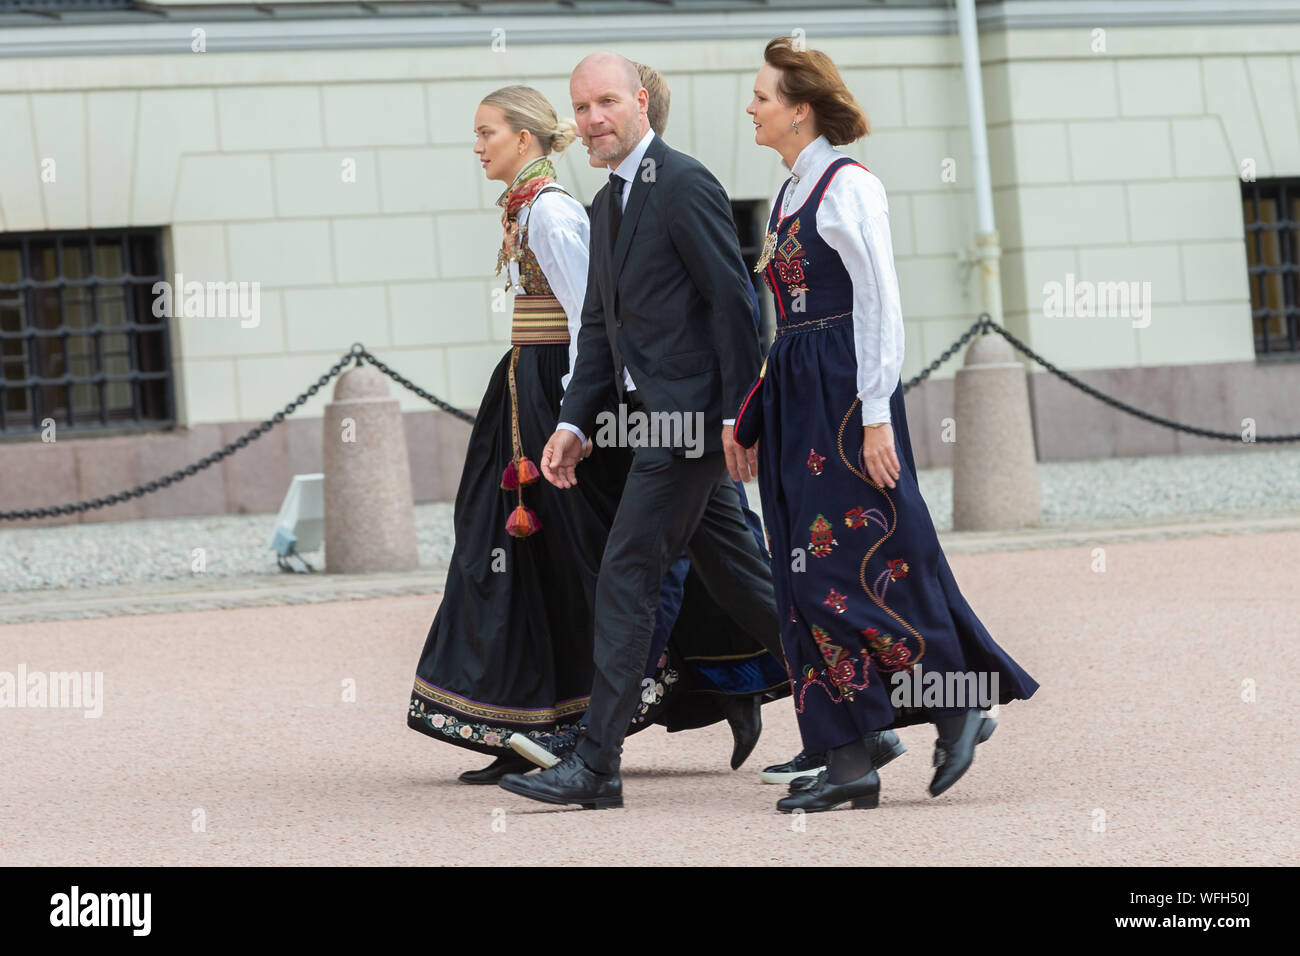 Actor Bard Tufte Johansen and his family arriving for the confirmation of Princess Ingrid Alexandra of Norway at the Royal Palace Oslo, Norway credit Stock Photo